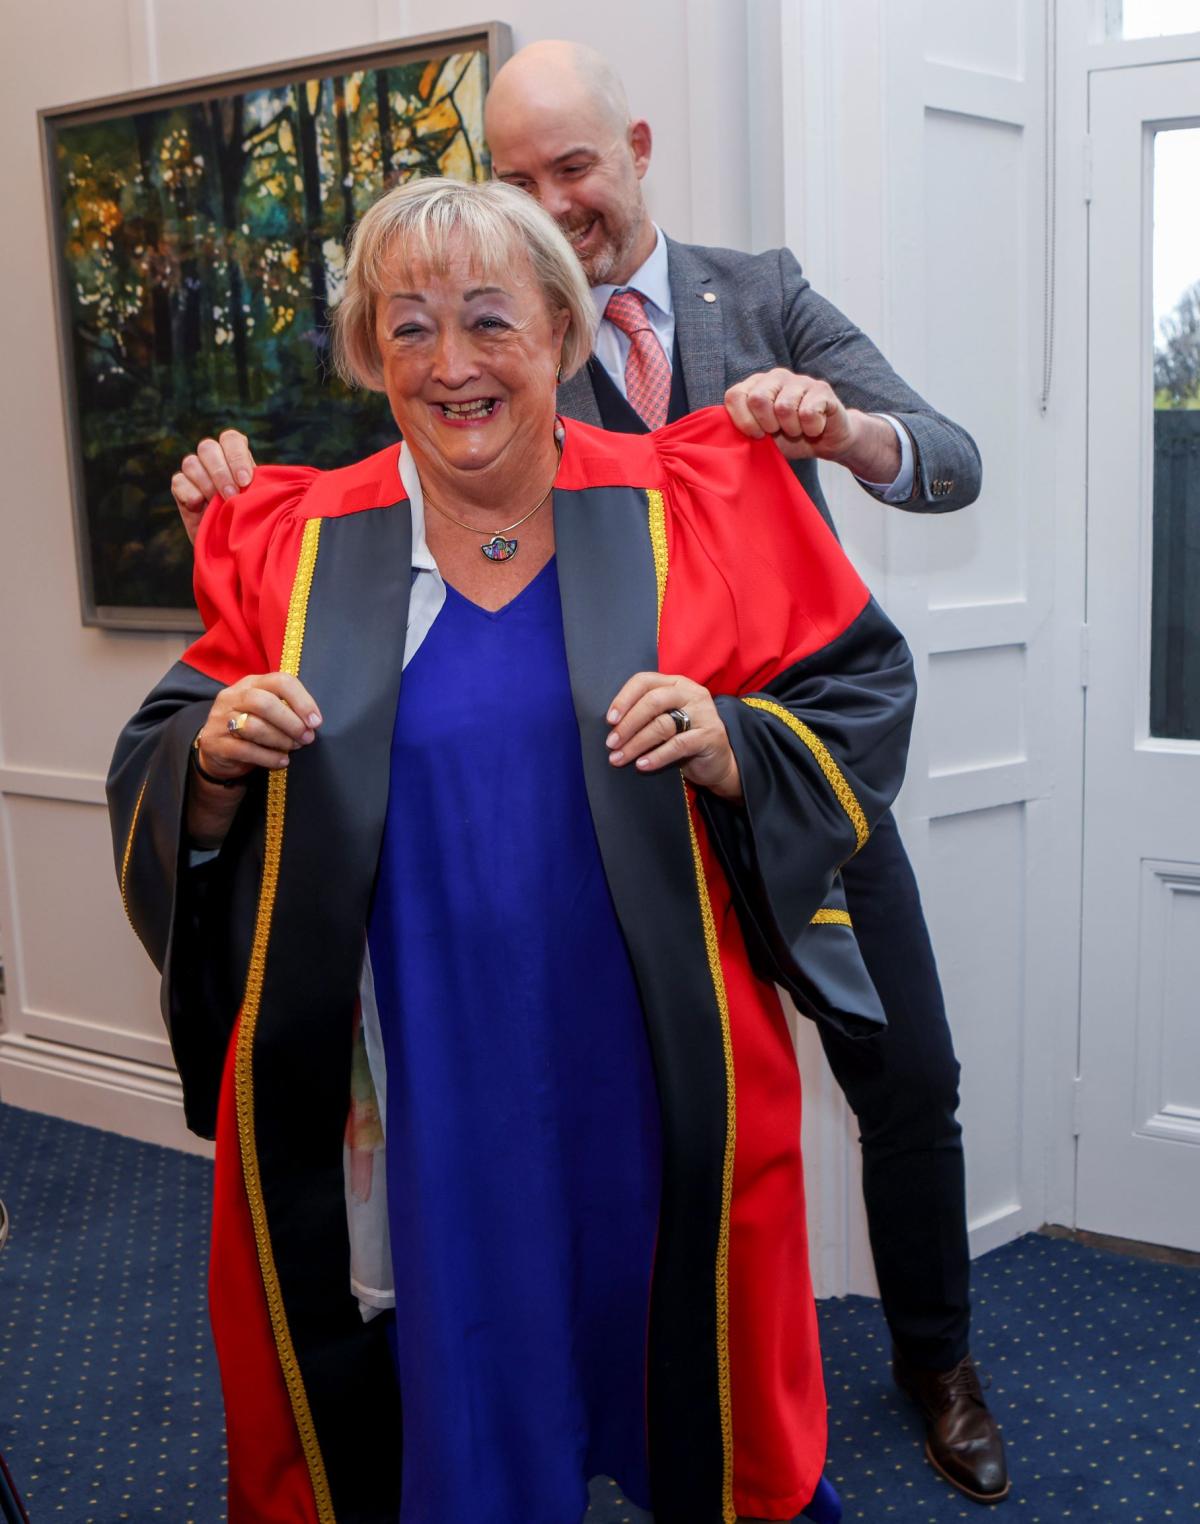 Prof Monica McWilliams donning her robe ahead of her honorary conferring